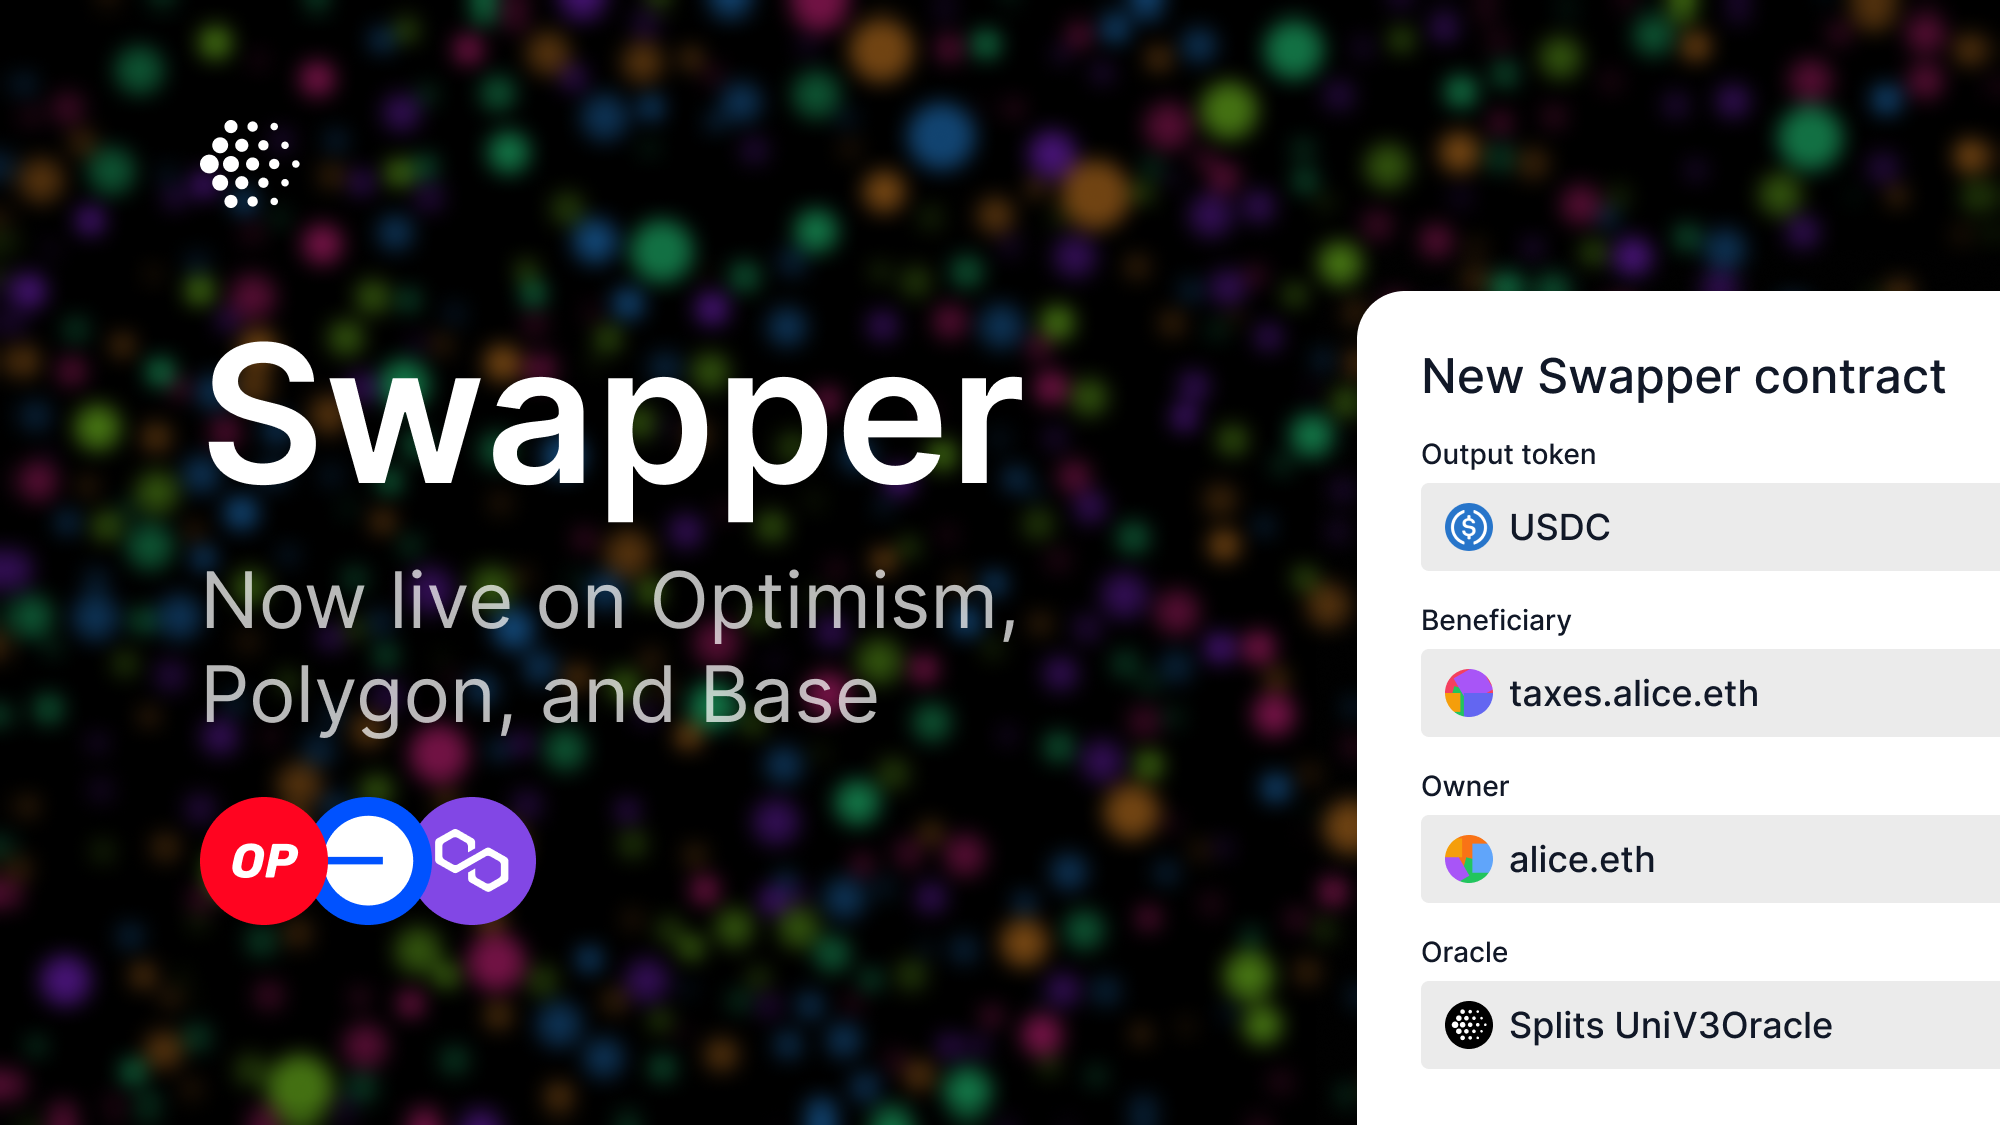 Swapper is now live on Optimism, Base, and Polygon